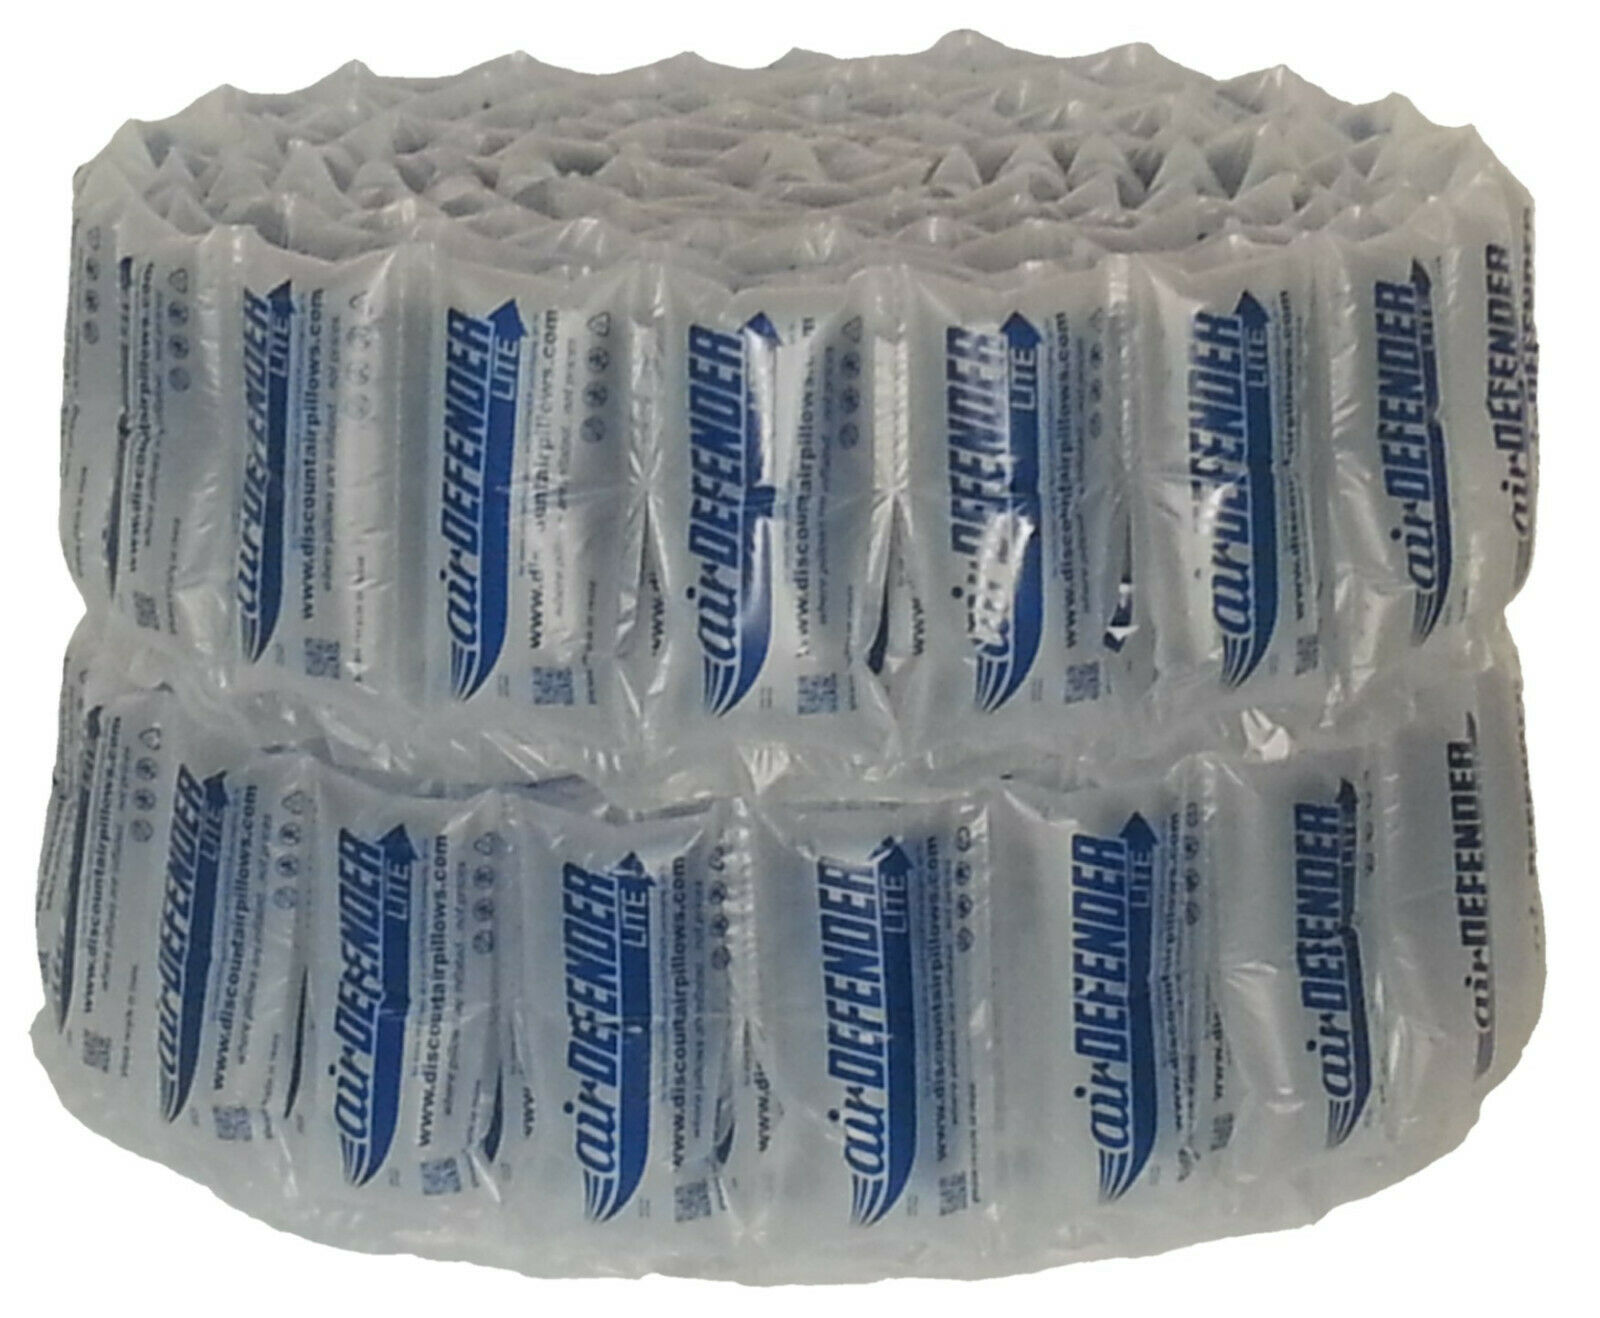 4x8 Air Pillows 26 Gallon Void Fill Packaging Compare Packing Peanuts Shipping